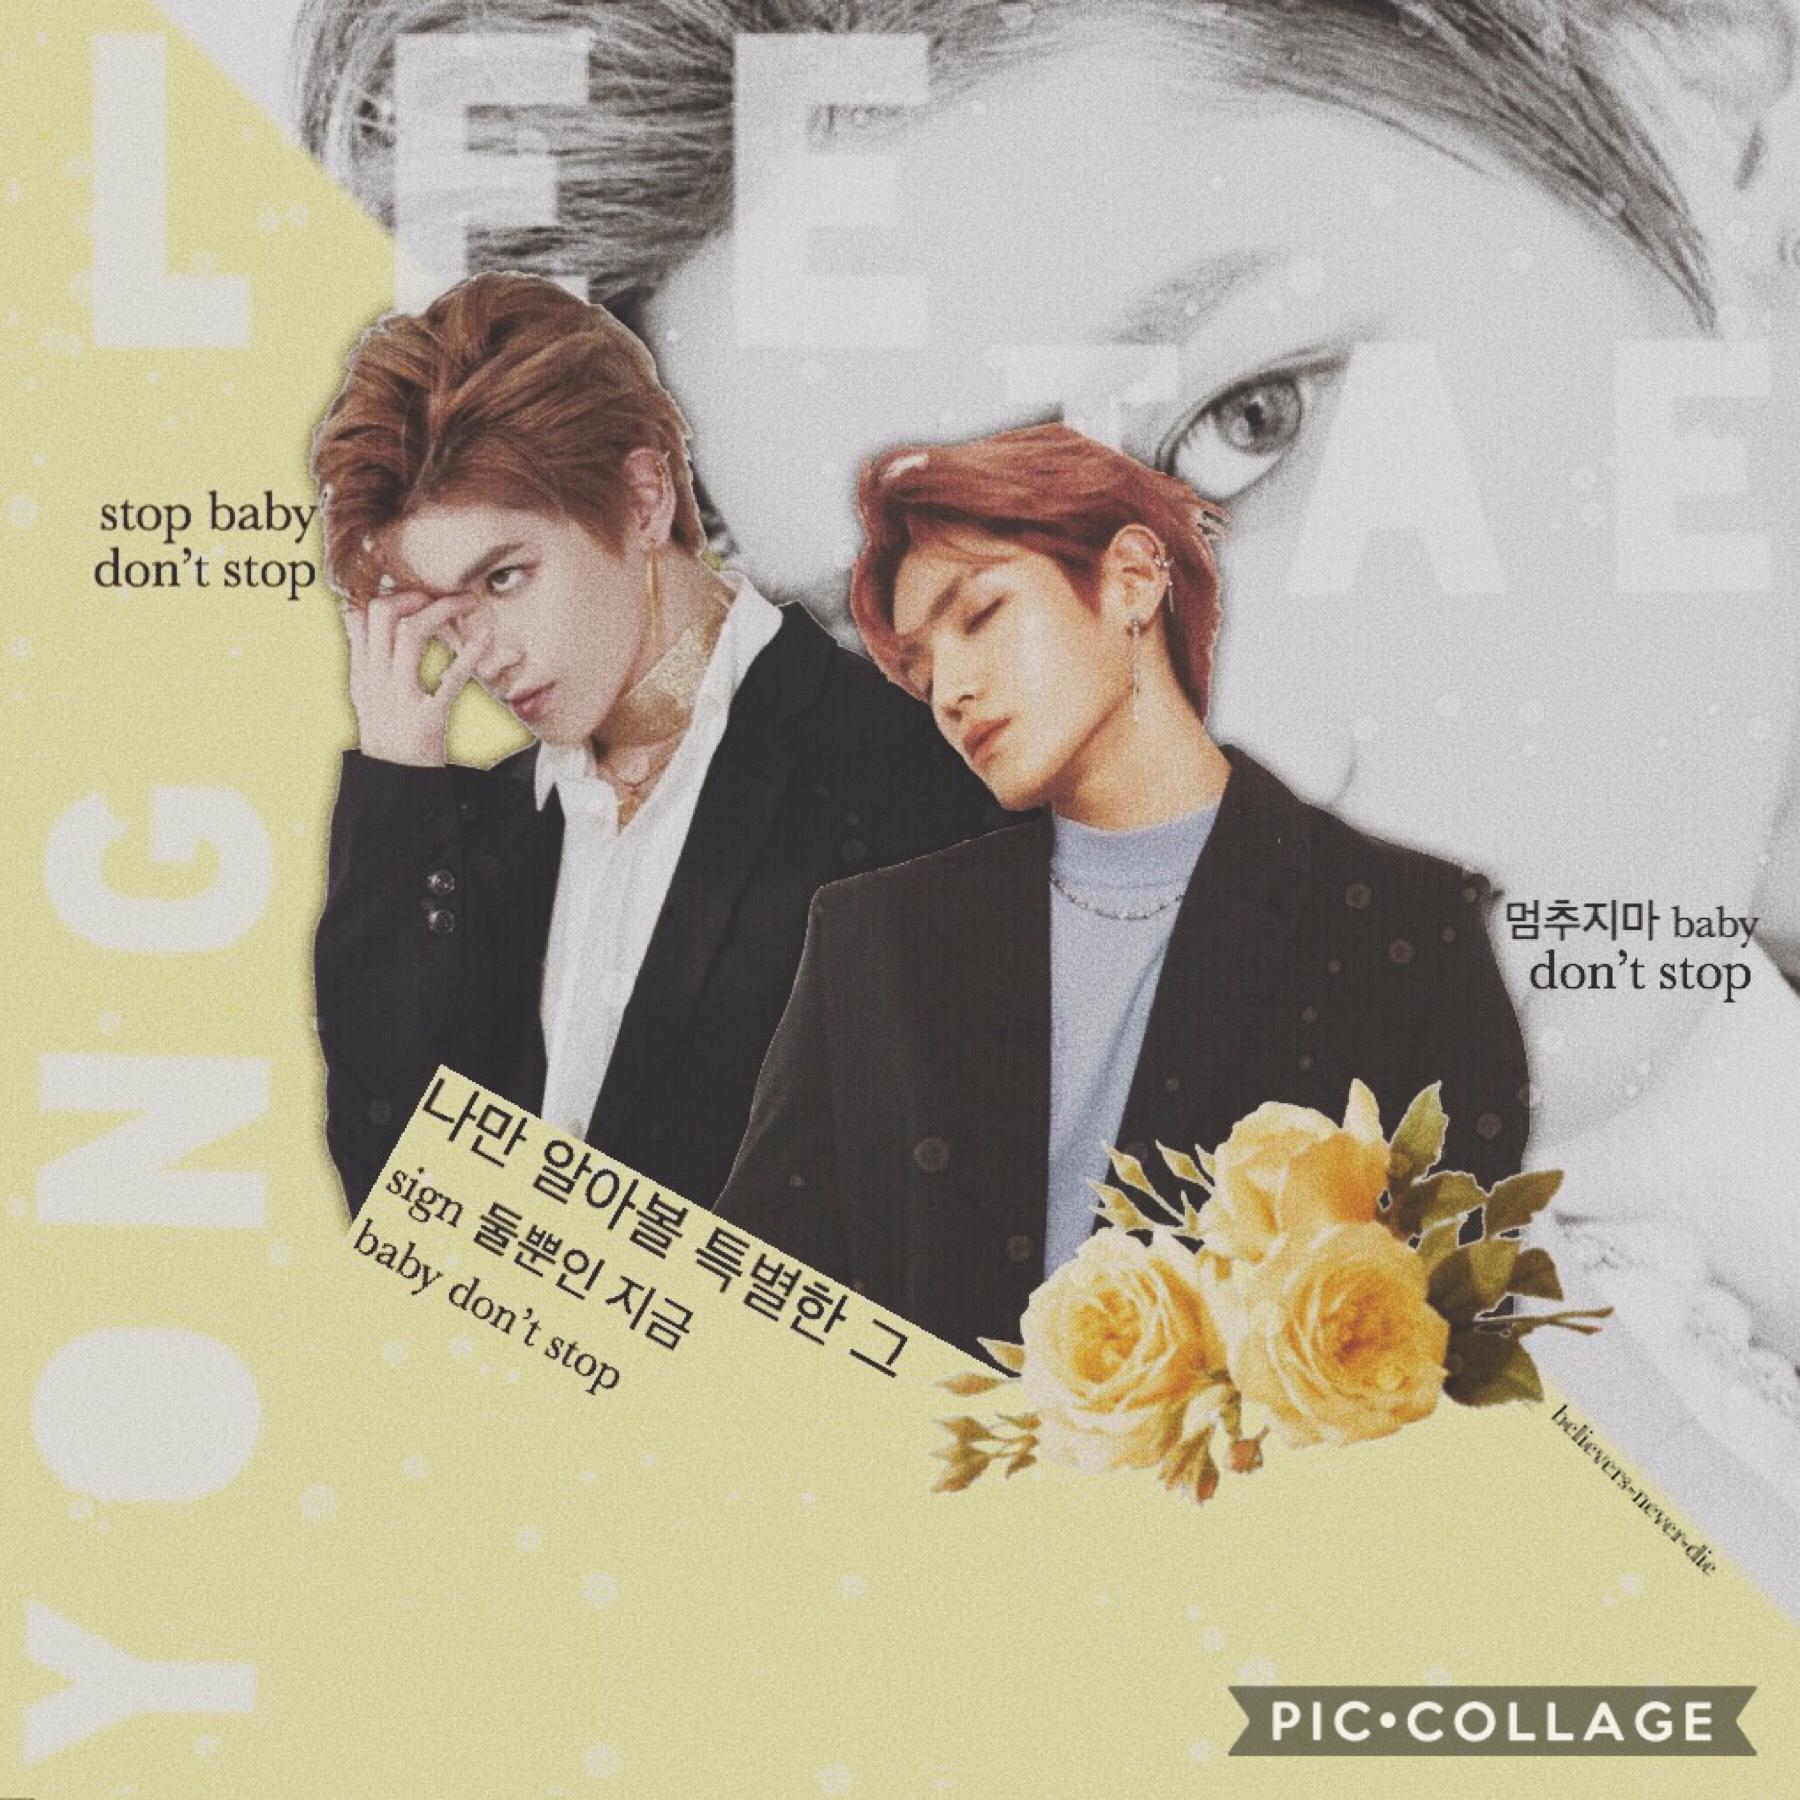 ☀️ tap ☀️

happy taeyong dayyy! happy birthday to this amazing handsome man. this is ugly but it doesn’t matter! happy july~ ateez won their first two awards and i’m so proud i love them too much 💛